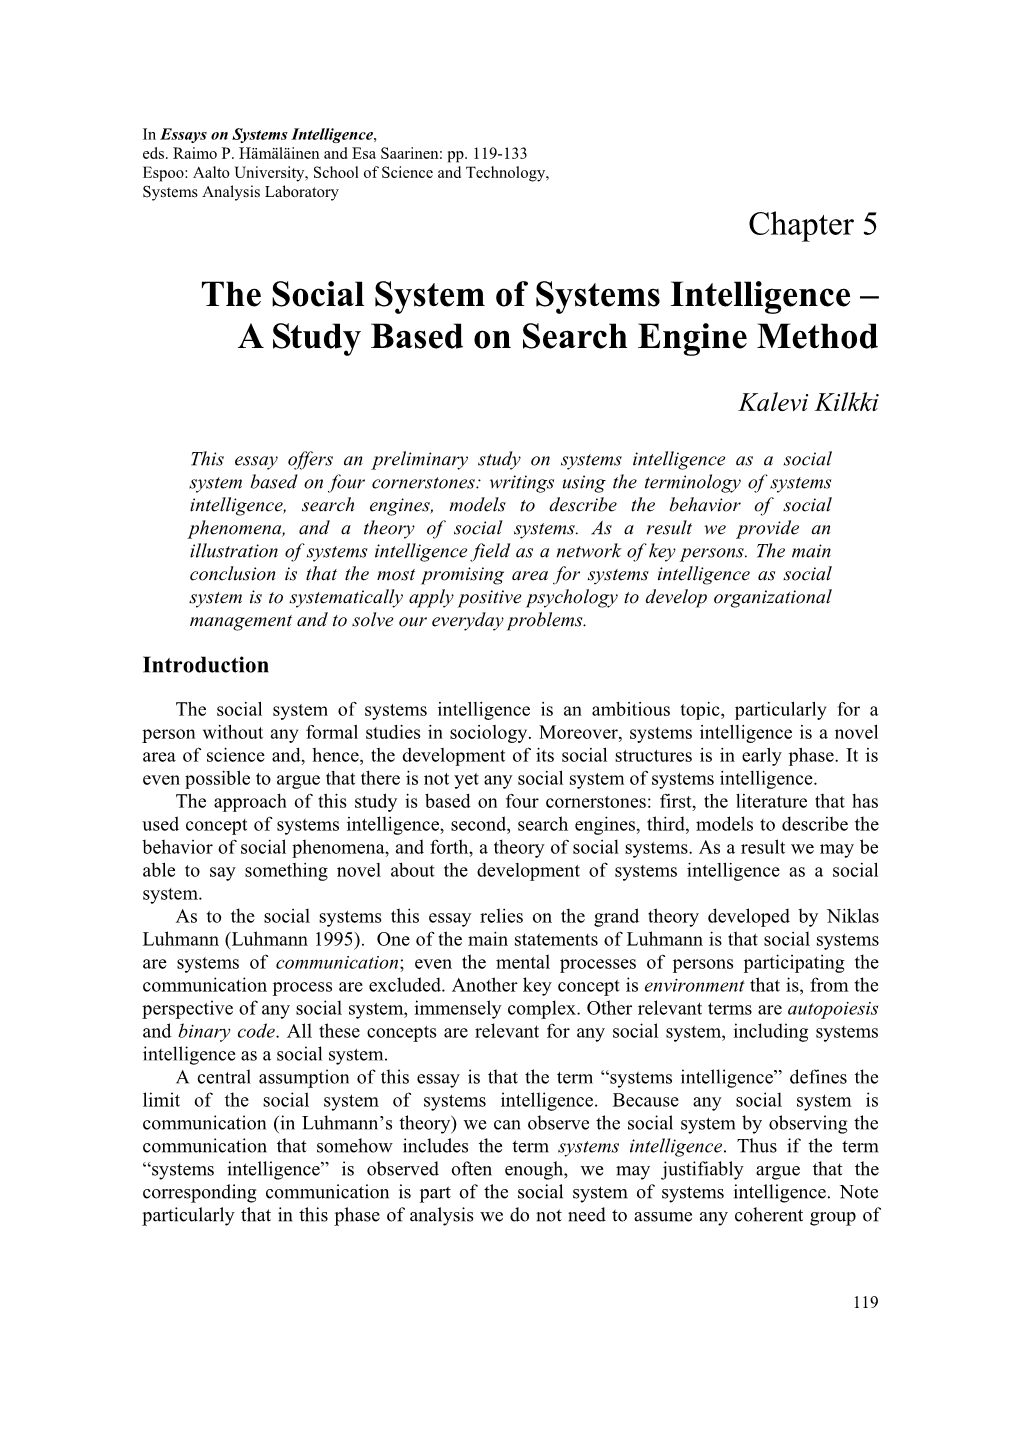 The Social System of Systems Intelligence – a Study Based on Search Engine Method